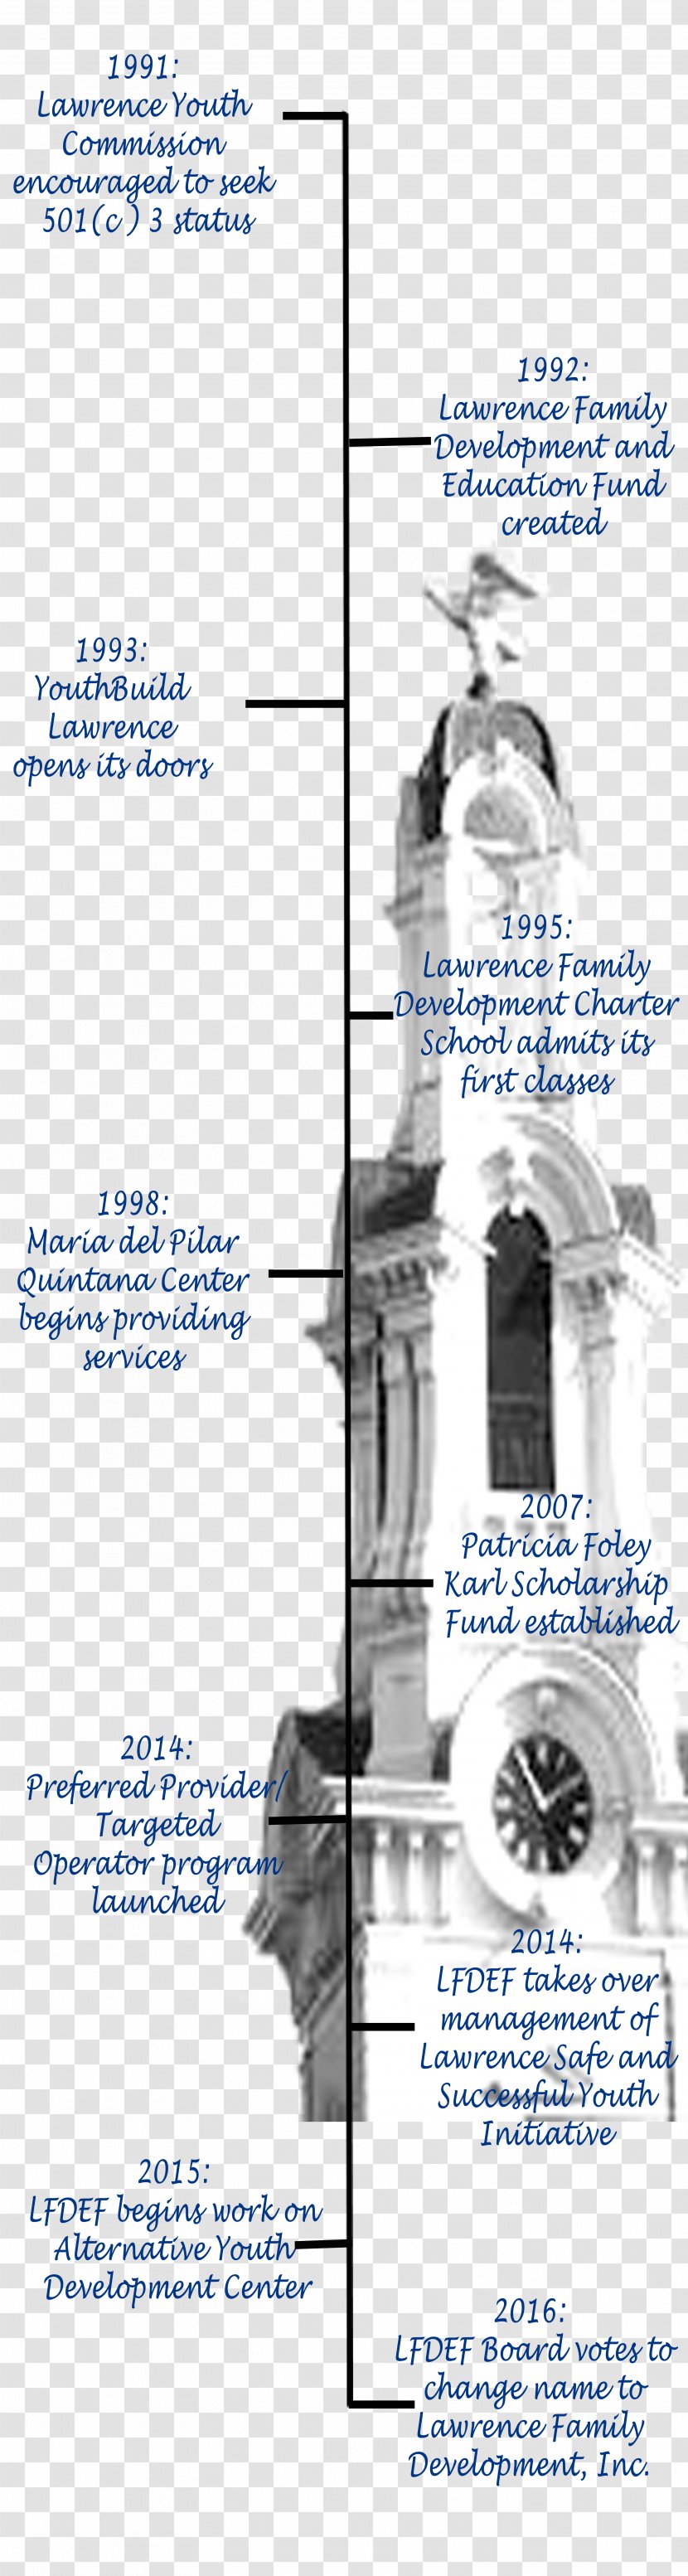 Lawrence Family Development Charter School Fall River 1912 Textile Strike History Quintana Center - New Timeline Transparent PNG